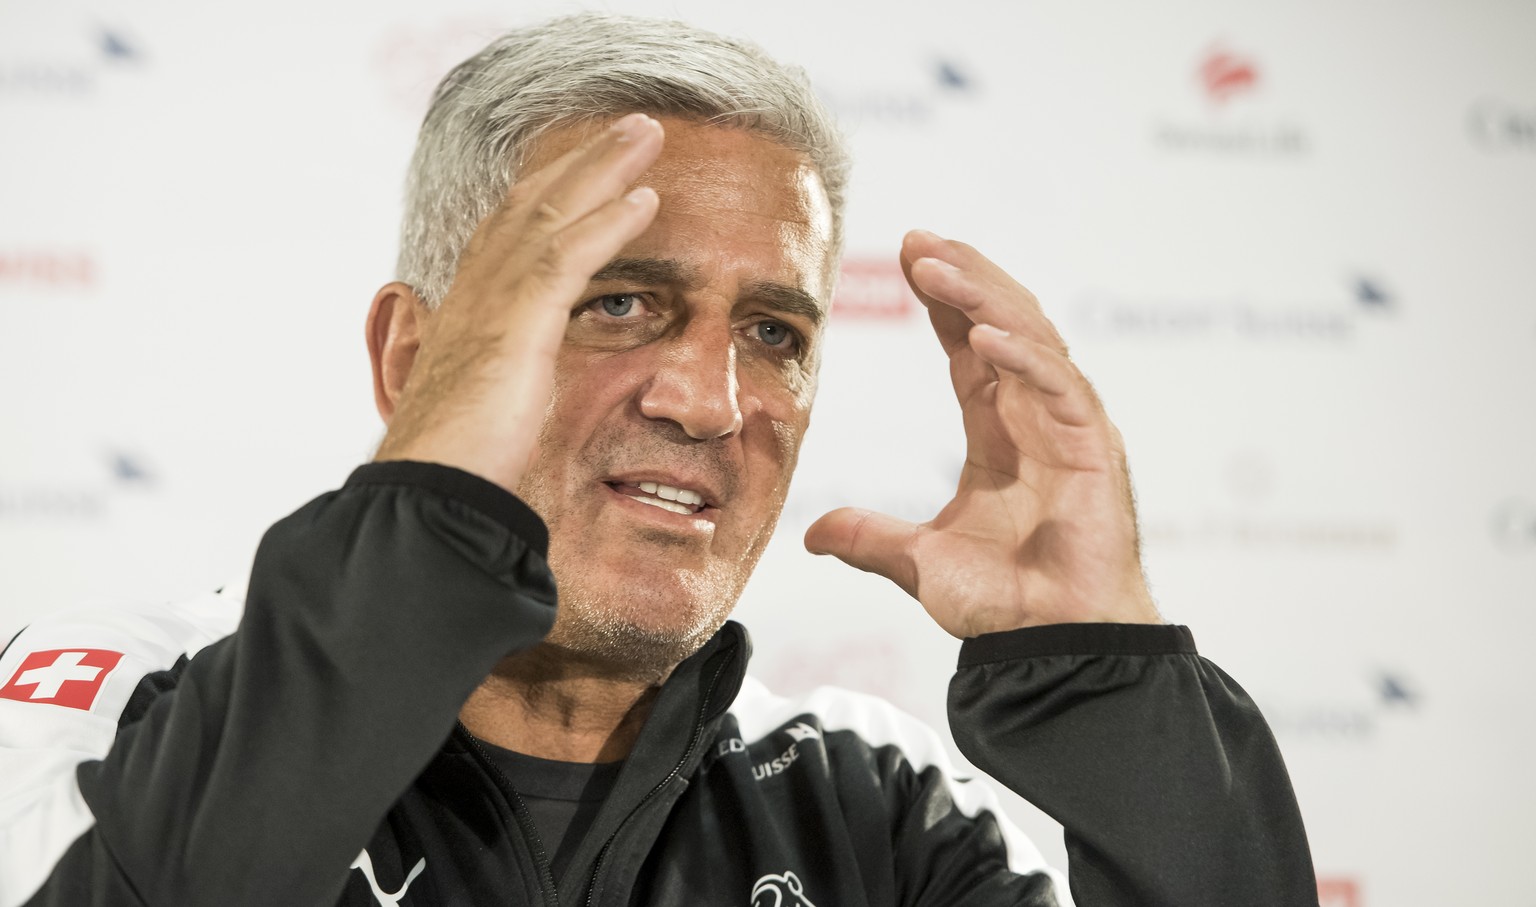 Swiss head coach Vladimir Petkovic, speaks during a press conference of the Swiss soccer national team, at the Stadium Maladiere, in Neuchatel, Switzerland, Wednesday, May 31, 2017. Switzerland will p ...